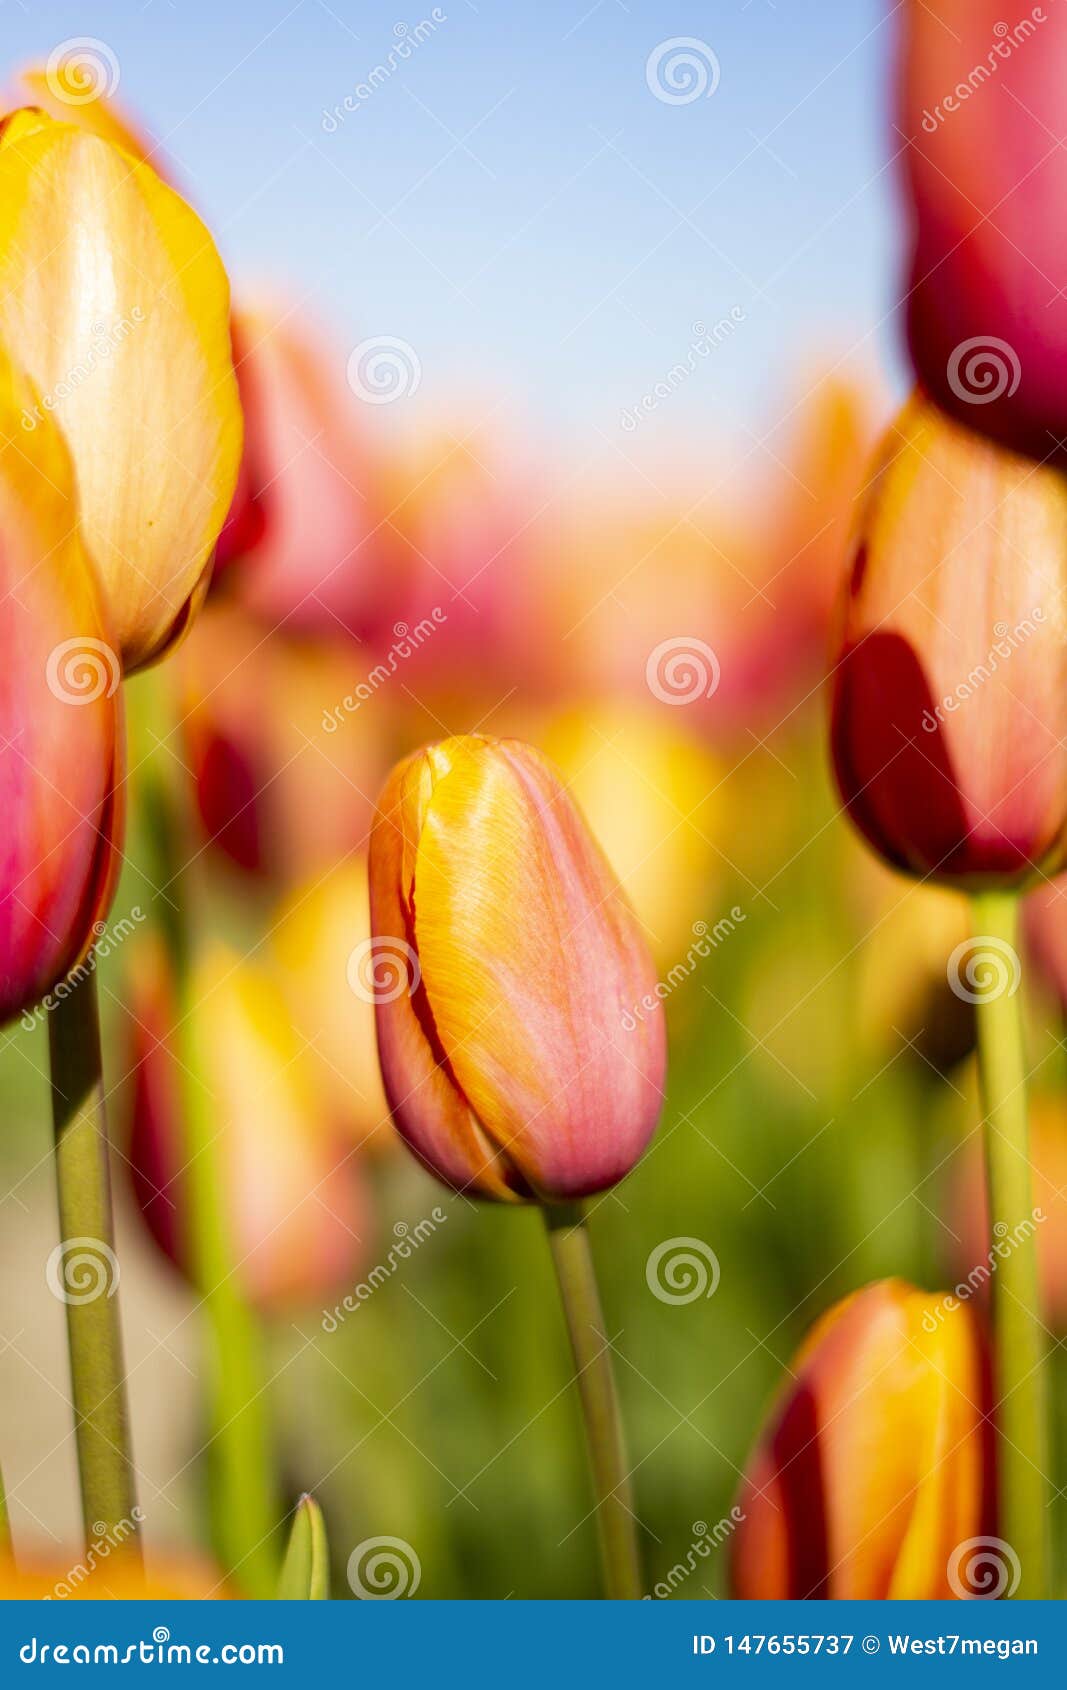 short orange pink tulip flower surrounded by taller flowers with blurred background